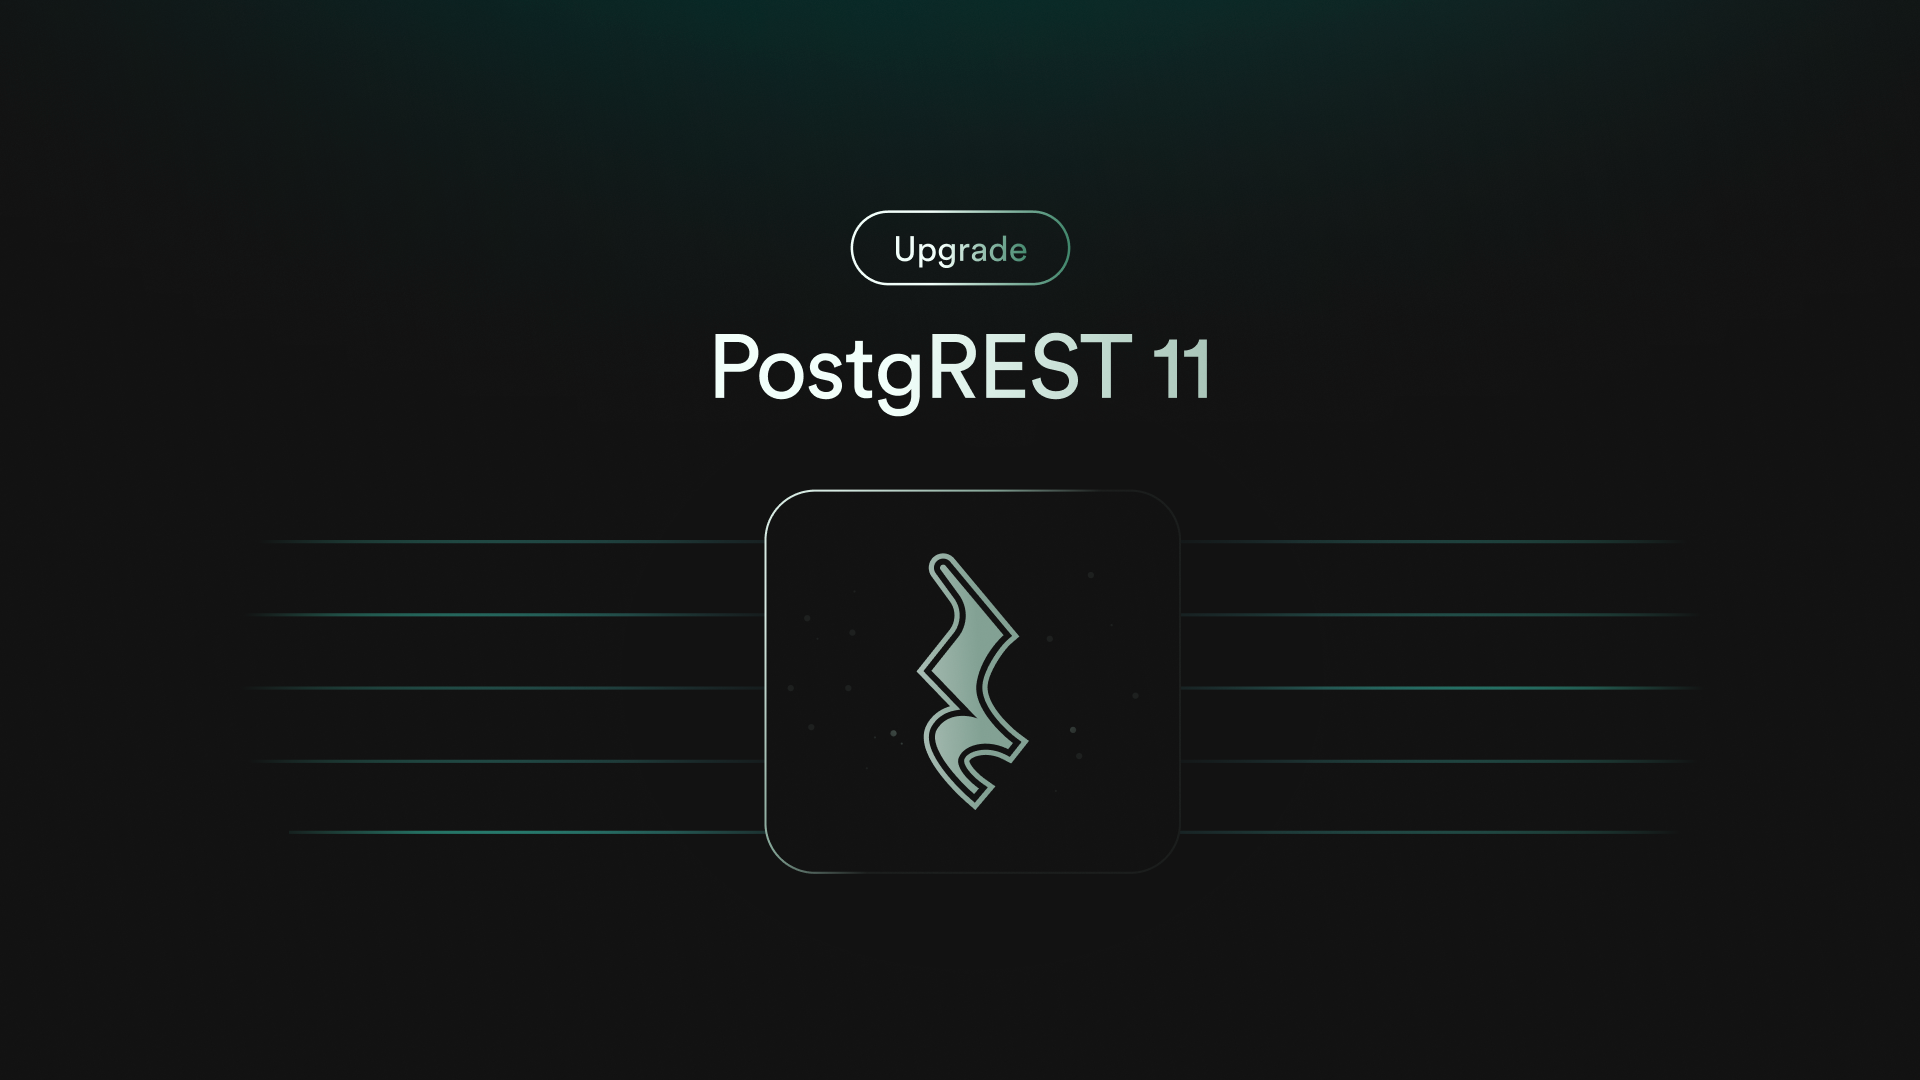 What is new in PostgREST v11.1?